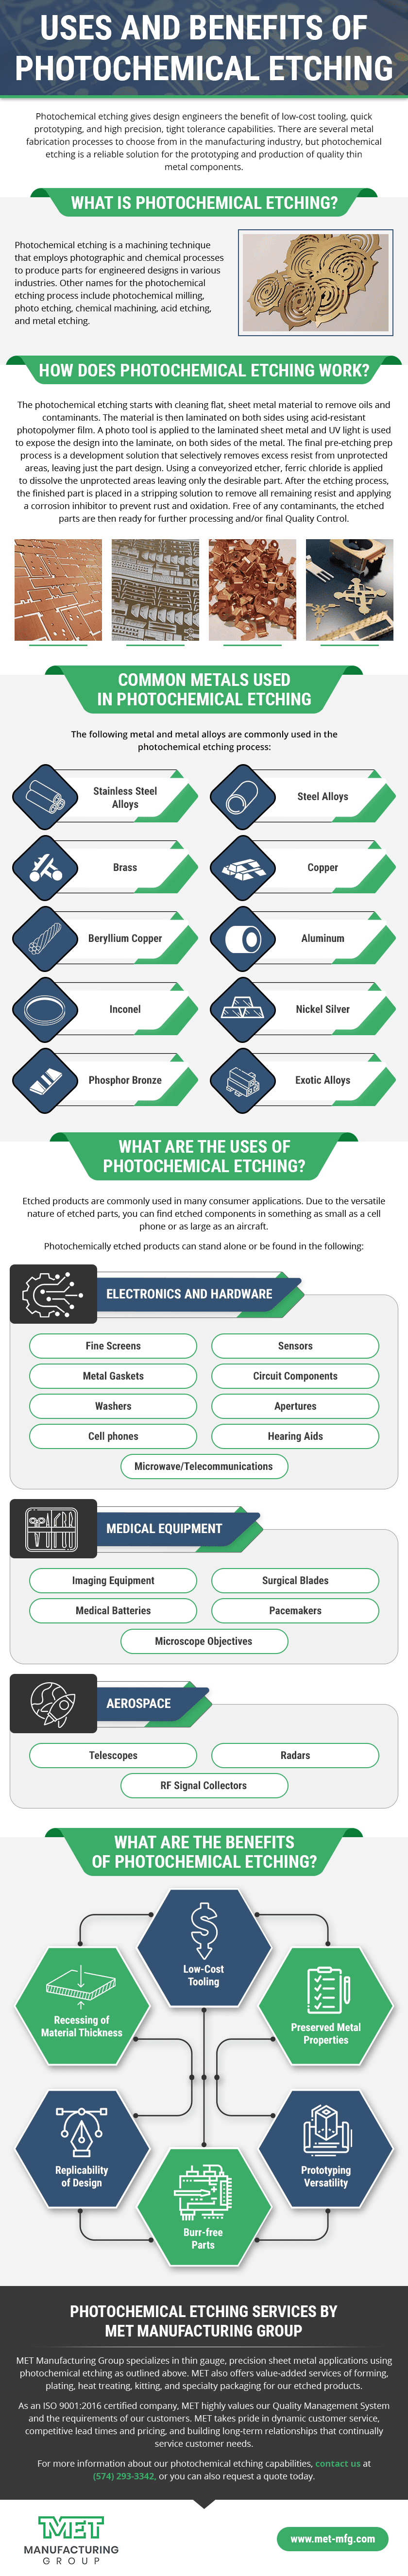 Uses-and-benefits-of-photochemical-etching